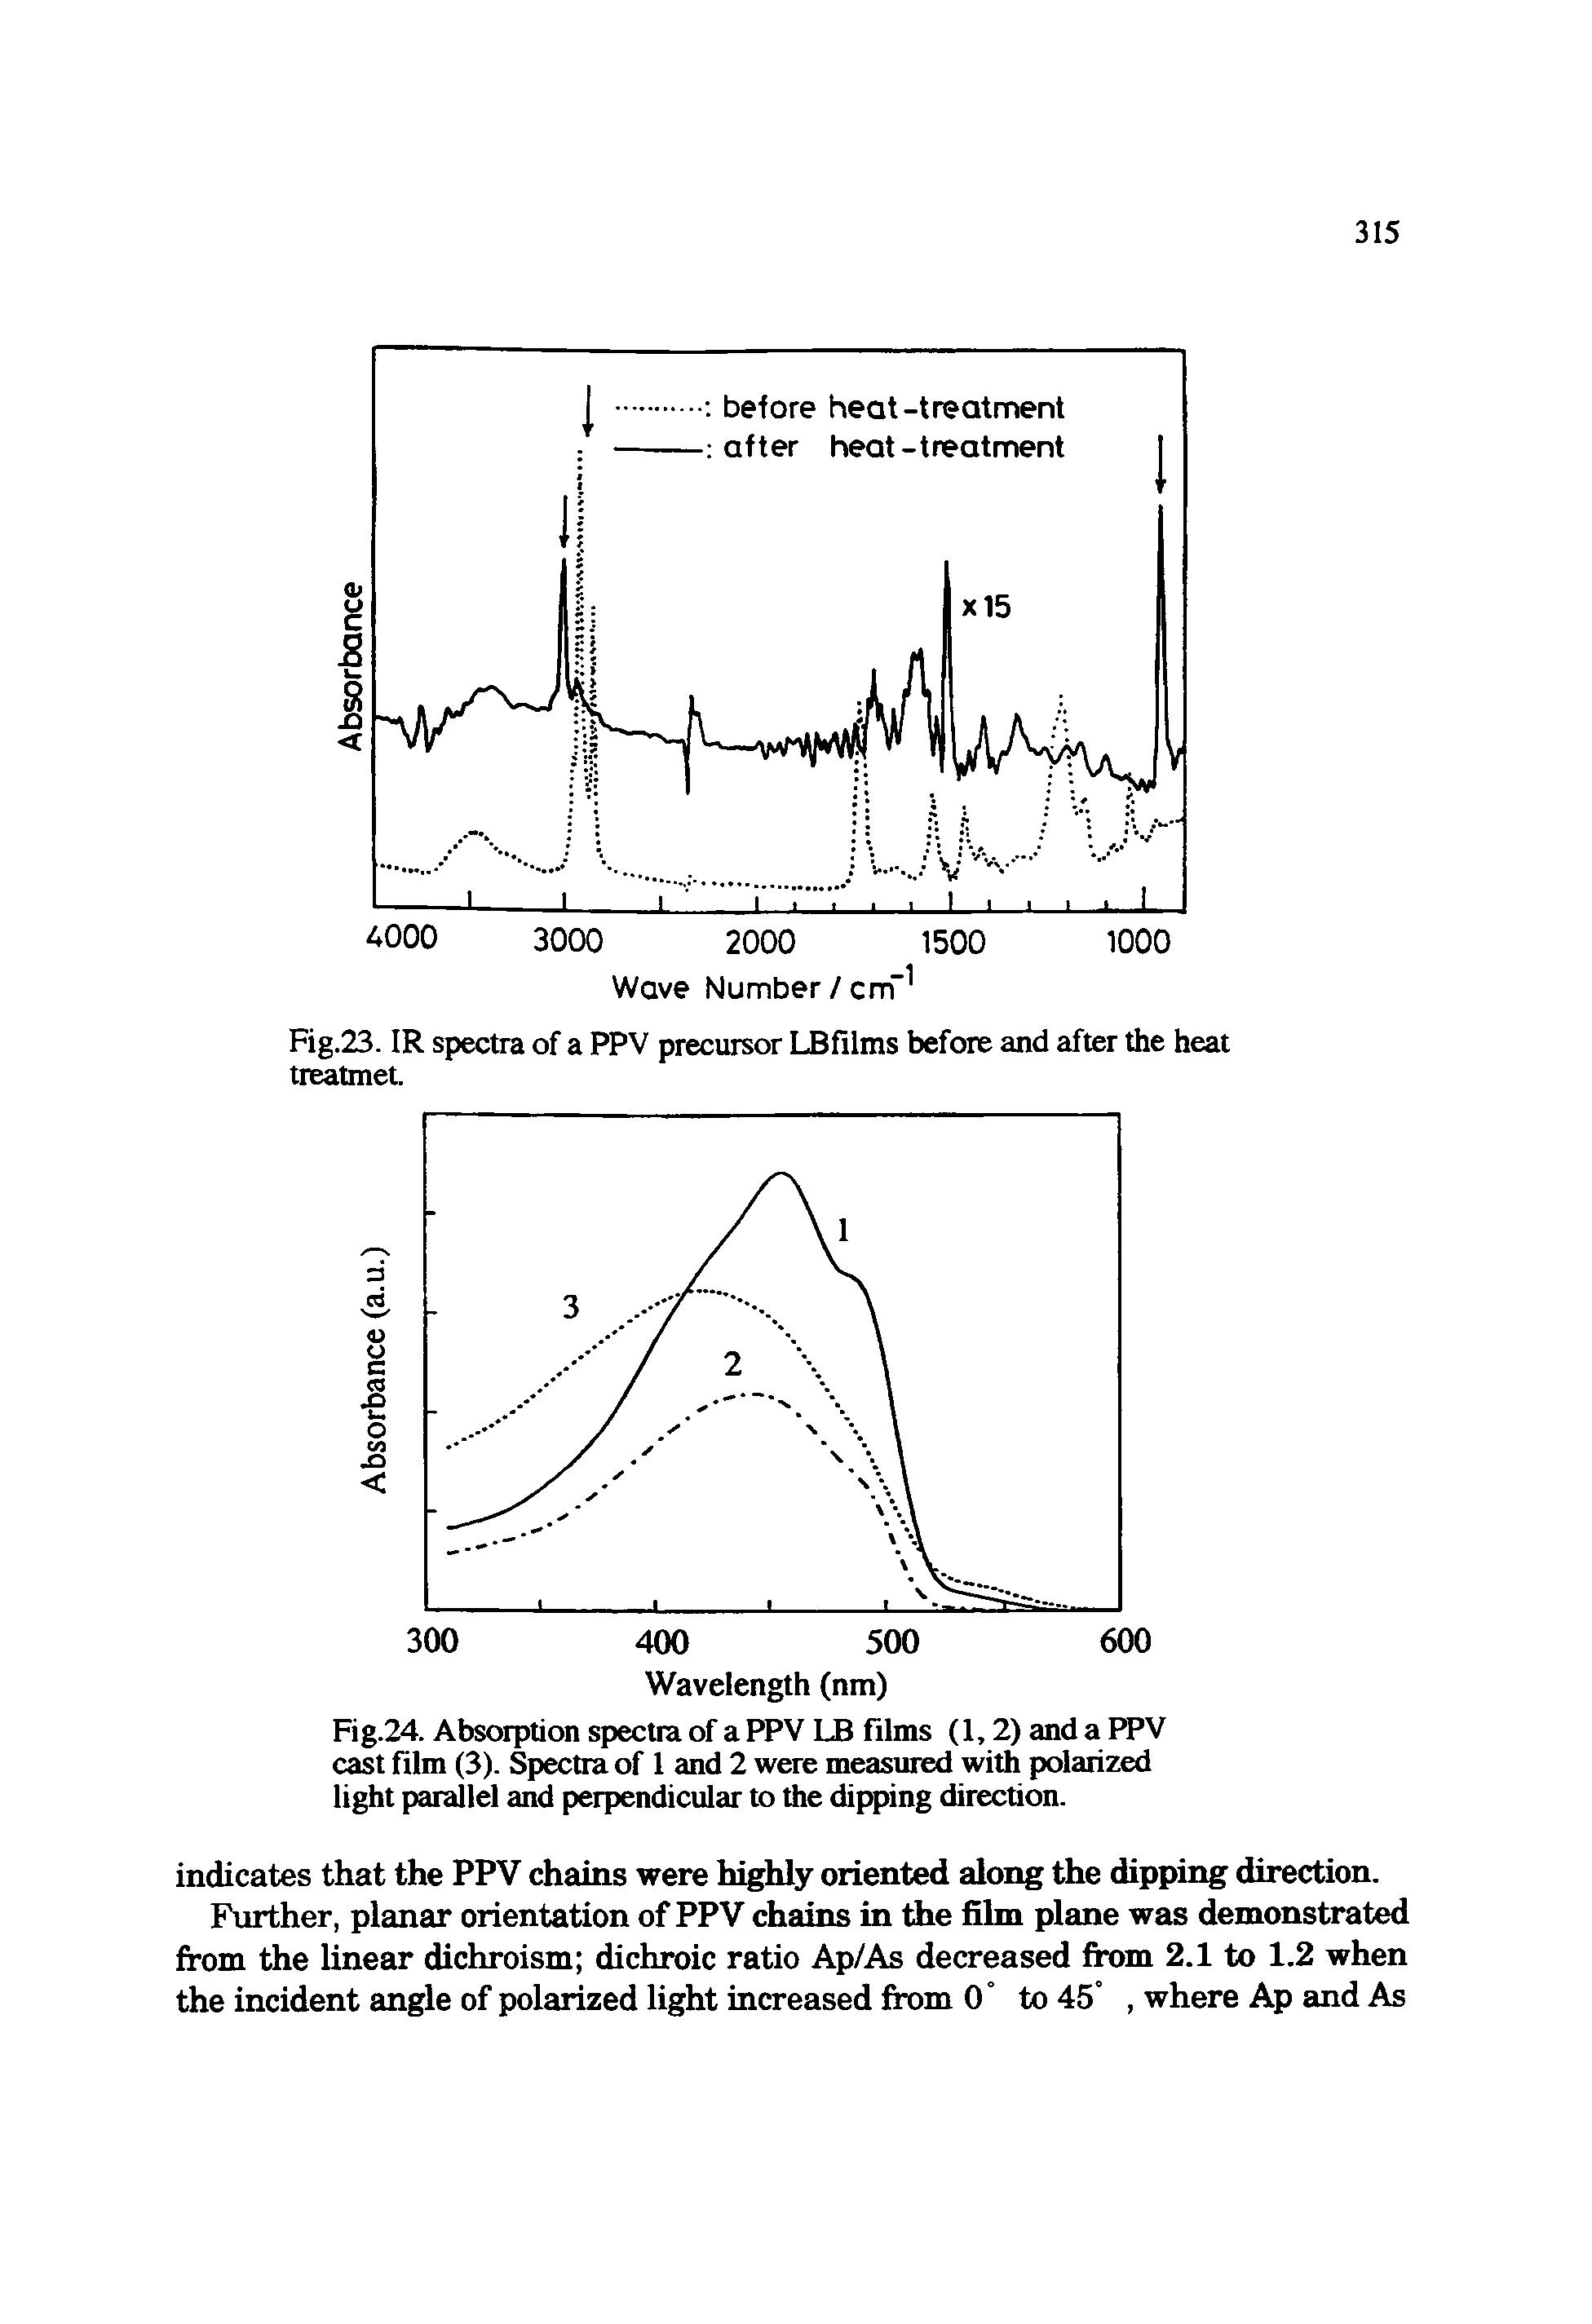 Fig.24. Absorption spectra of a PPV LB films (1,2) and a PPV cast film (3). Spectra of 1 and 2 were measured with polarized light parallel and perpendicular to the dipping direction.